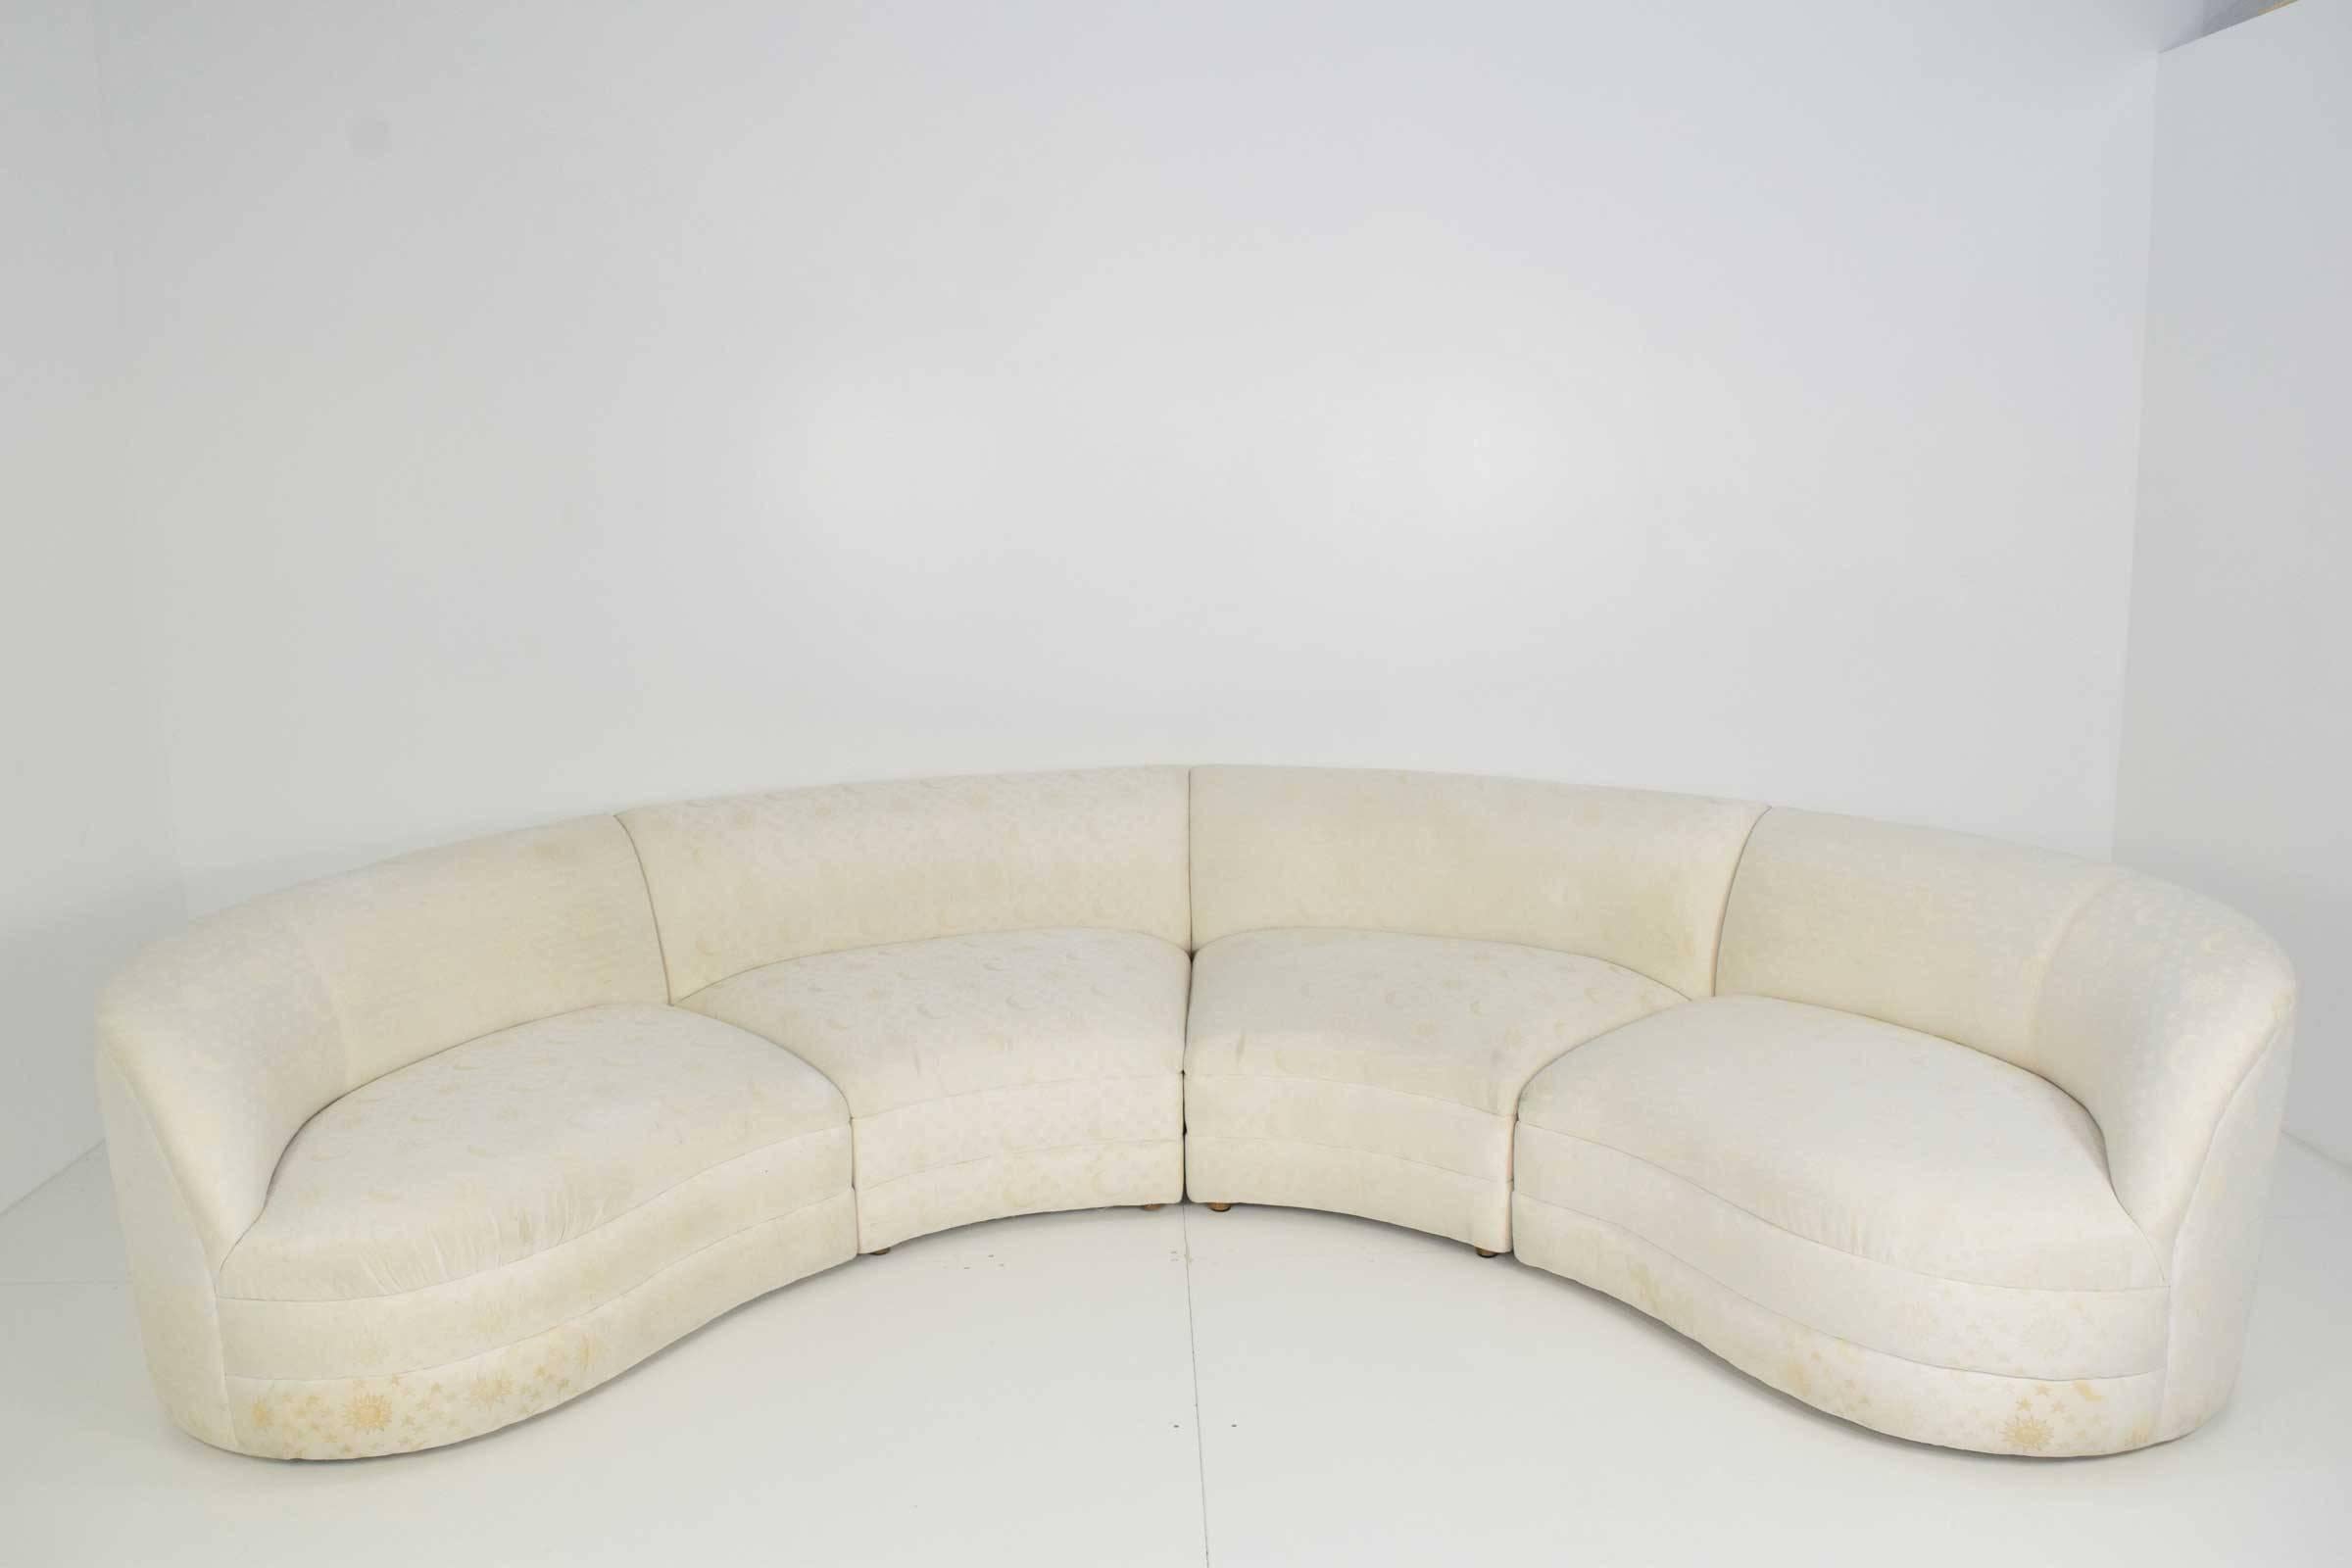 This sofa was designed by Vladimir Kagan for Cantoni. It is four sections with alligator clips to keep together. Beautiful serpentine shape. Sofa does need new upholstery.